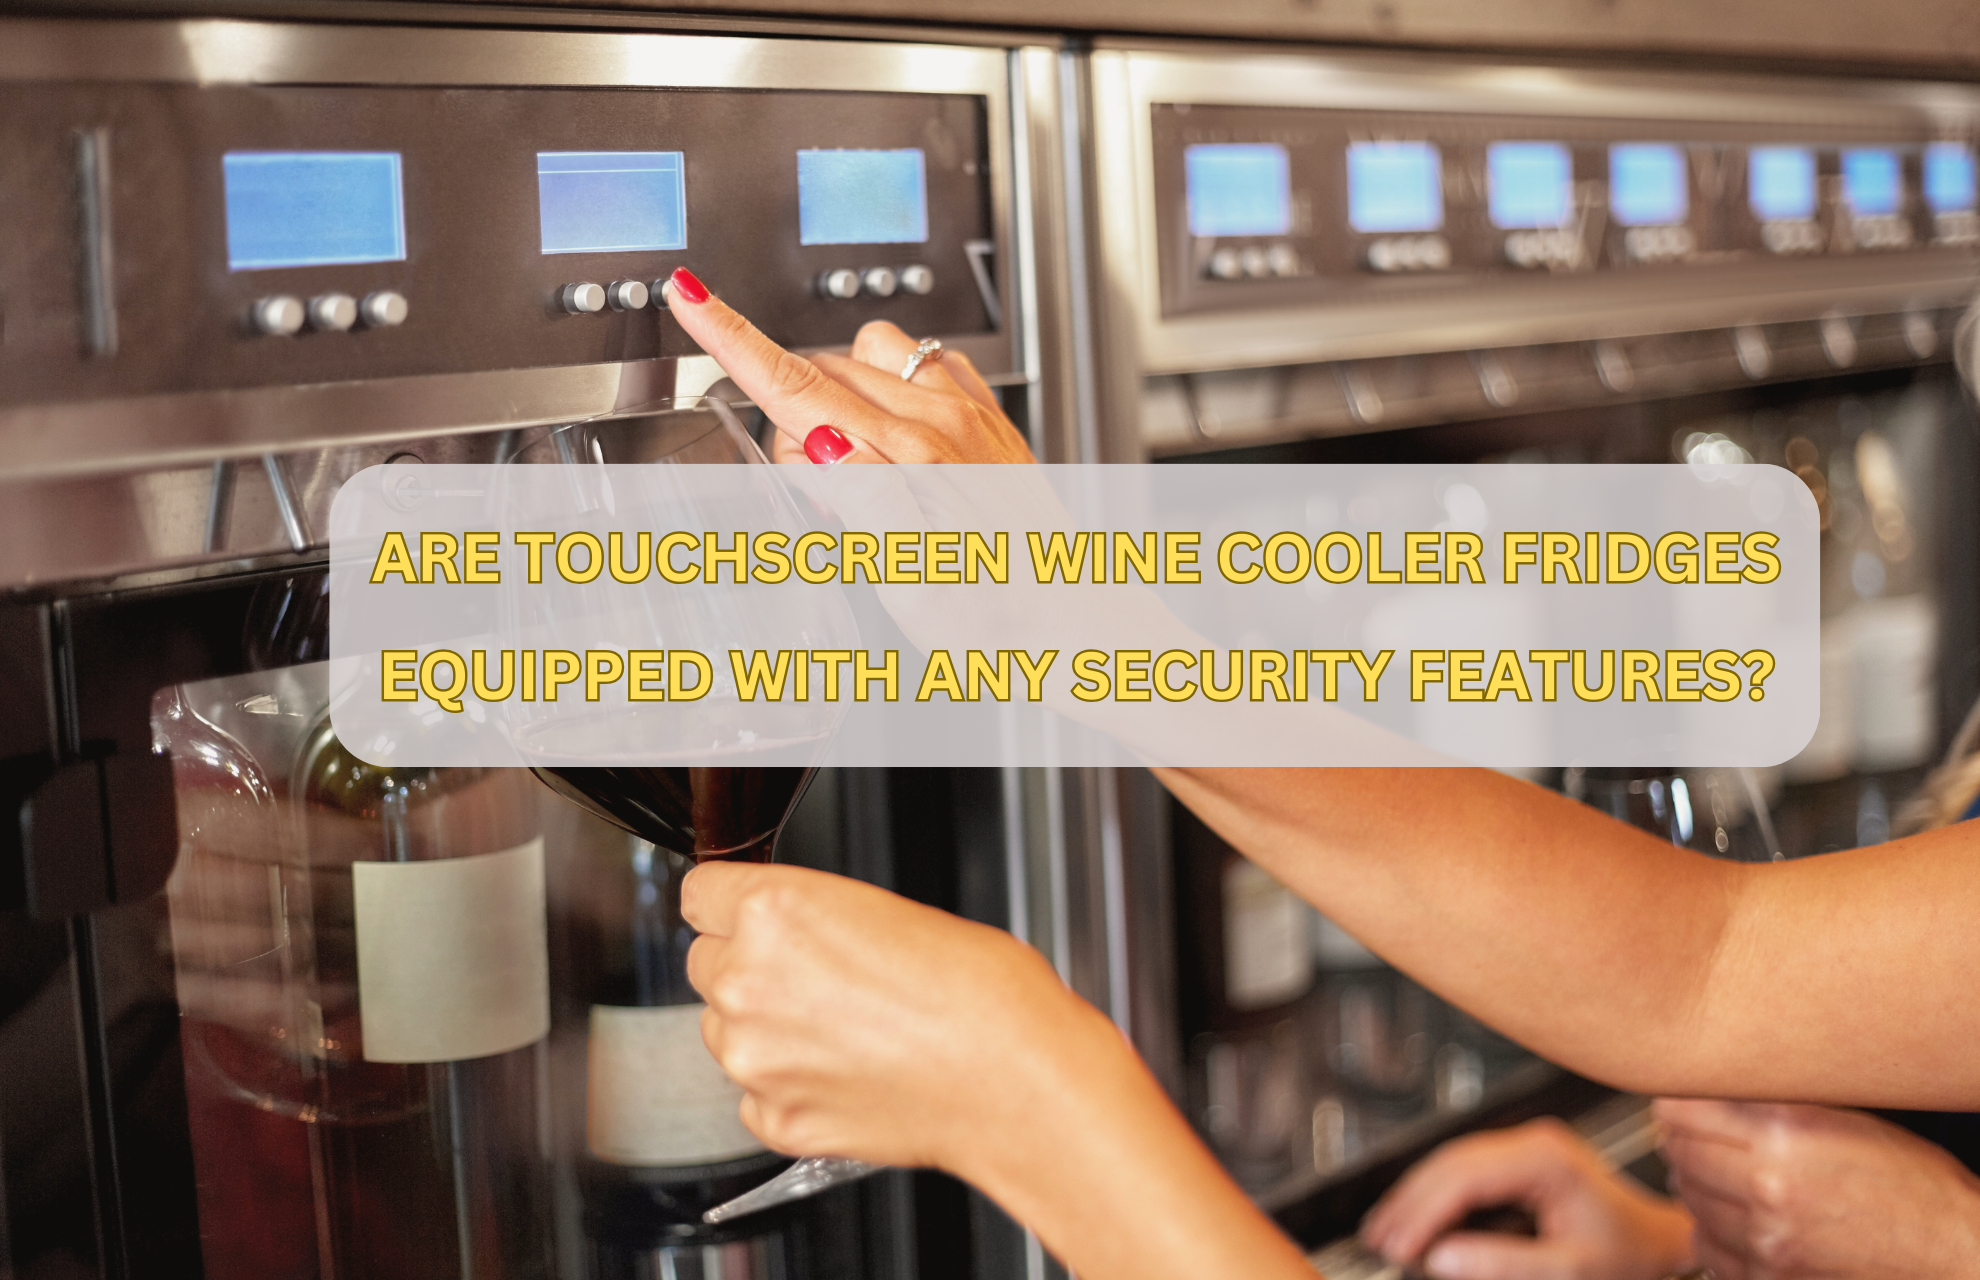 ARE TOUCHSCREEN WINE COOLER FRIDGES EQUIPPED WITH ANY SECURITY FEATURES